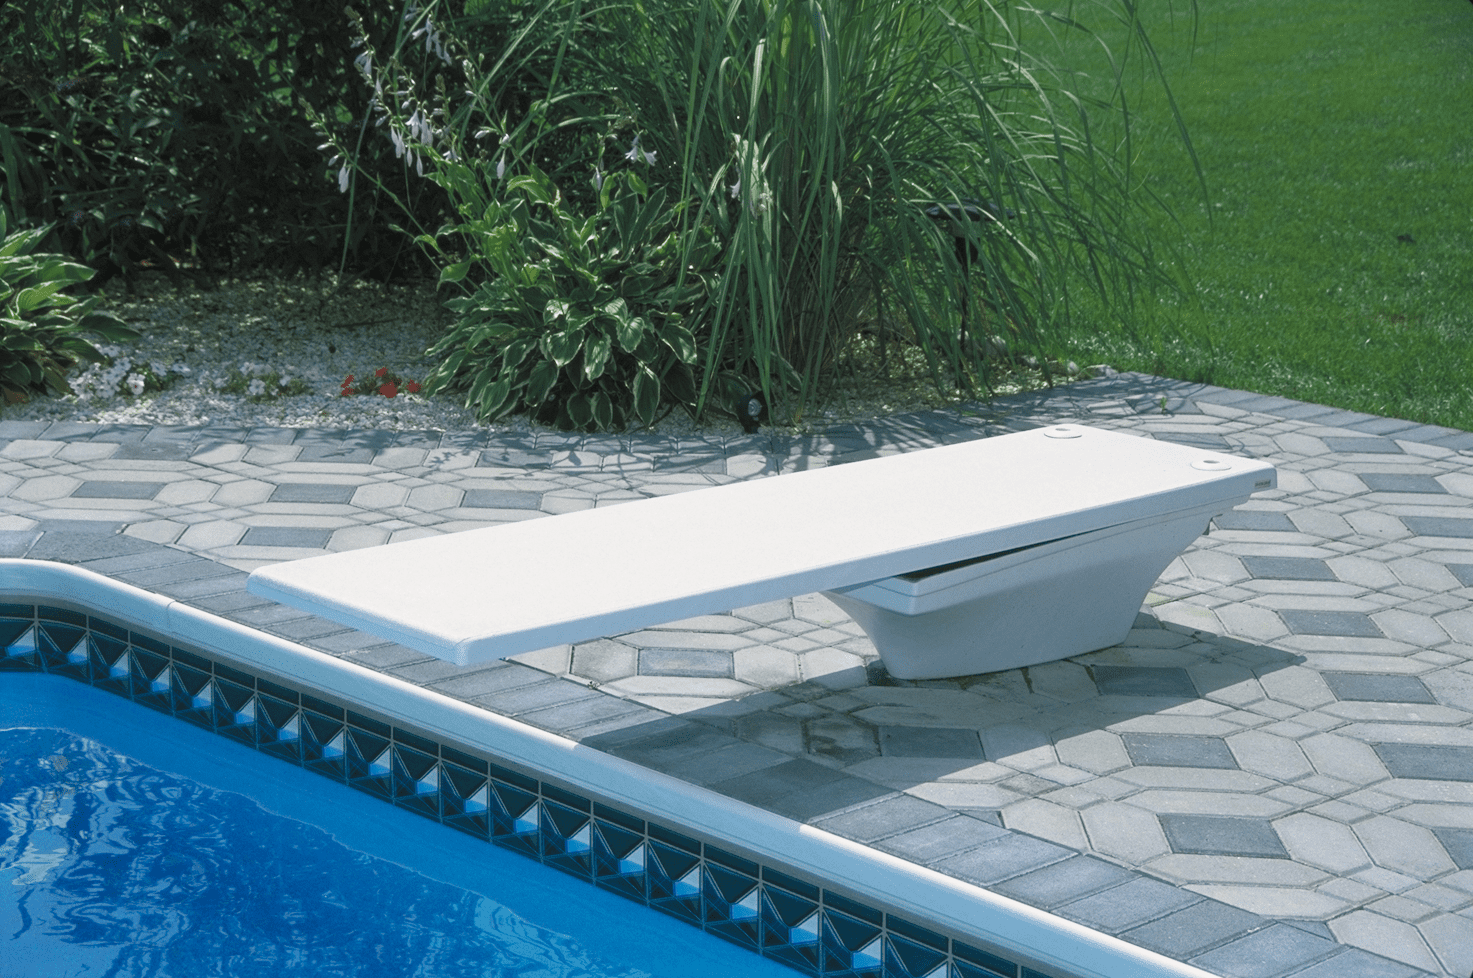 Radiant White & S.R.Smith FC-100A U-Frame Fulcrum Cover for Diving Board S.R Smith 66-209-268S2-1 Fibre-Dive Replacement Diving Board 8-Feet 18-Inch 